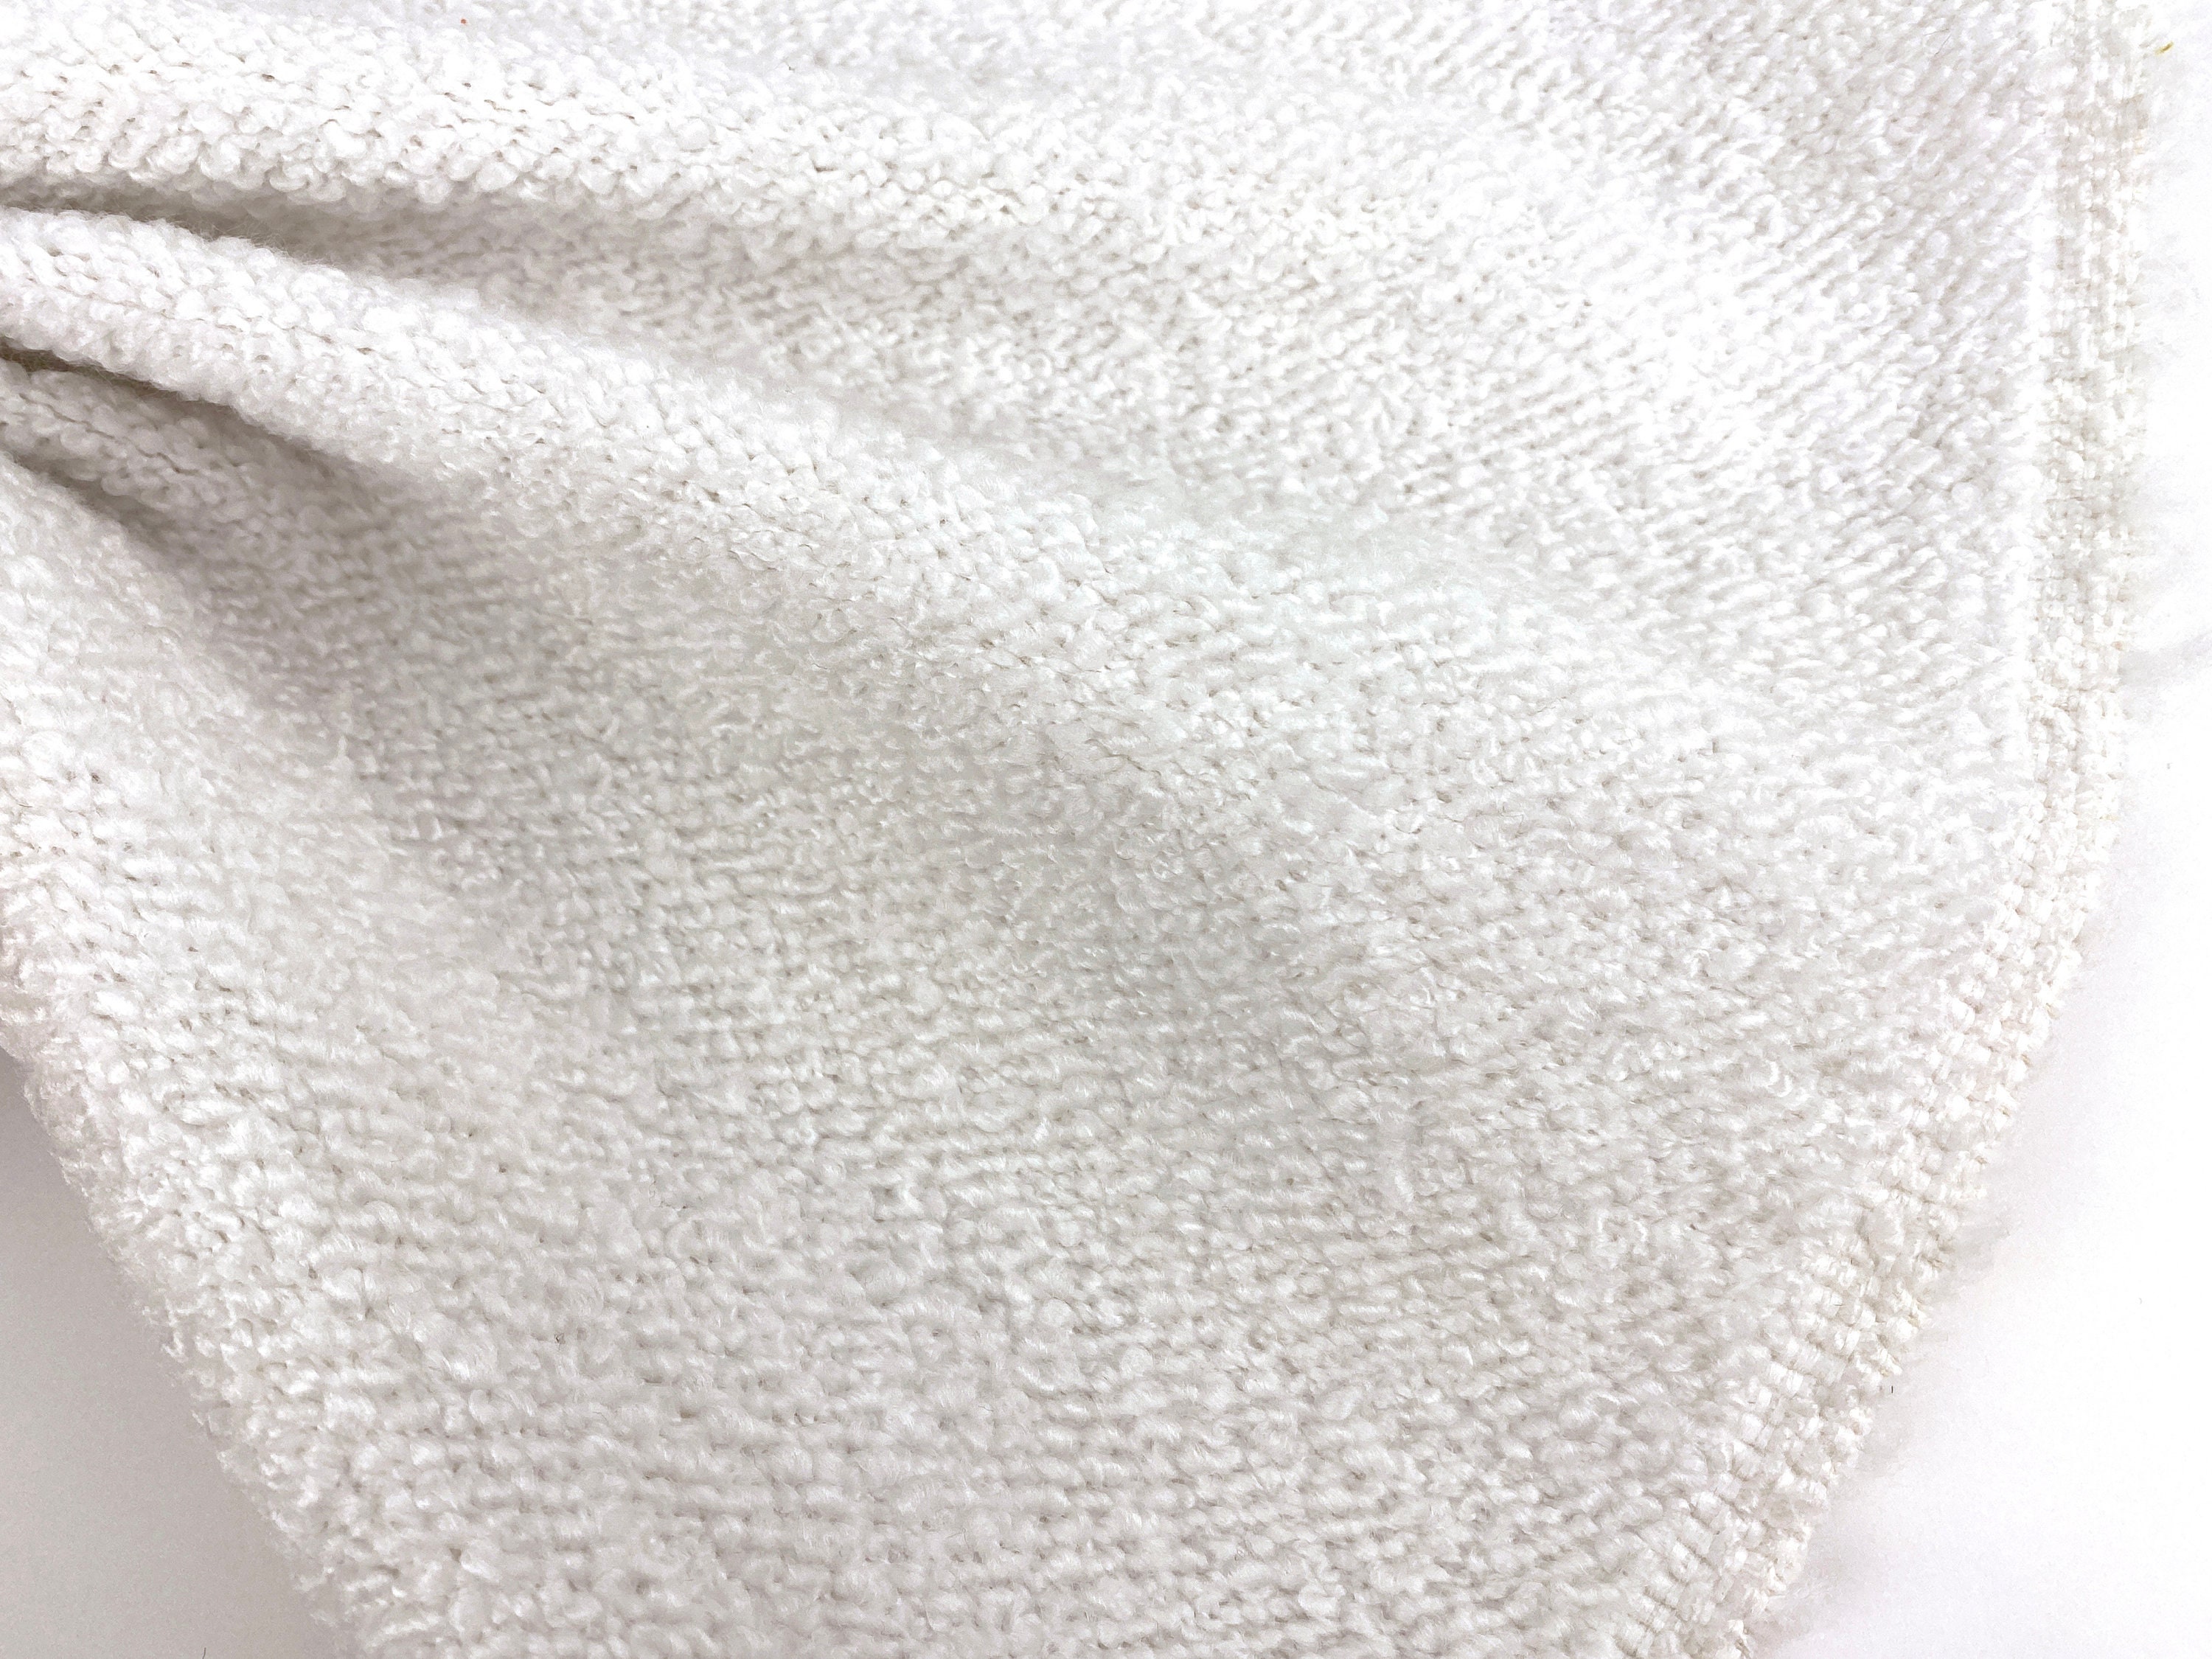 NEW Sir Hugo Designer Upholstery Boucle Sherpa Faux Fur Fabric in White